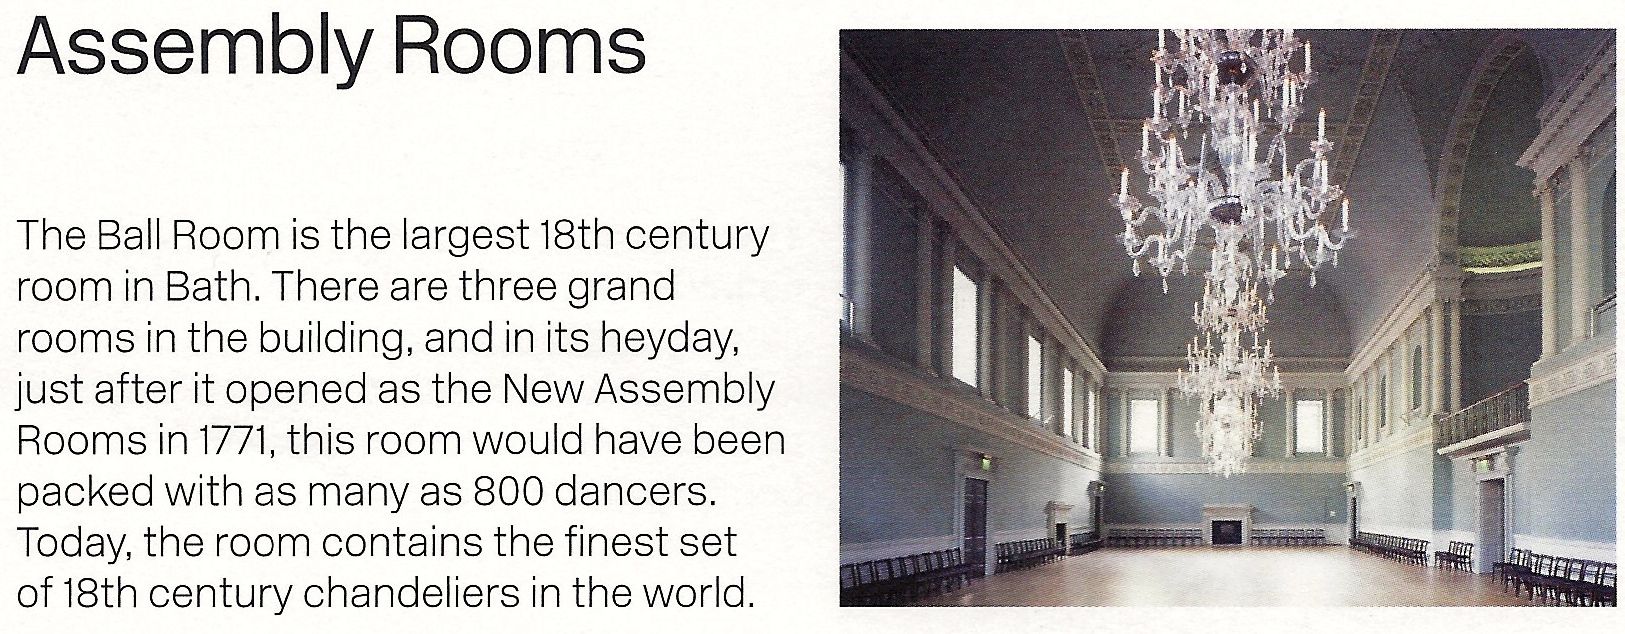 The Ballroom, The assembly Rooms, Bath